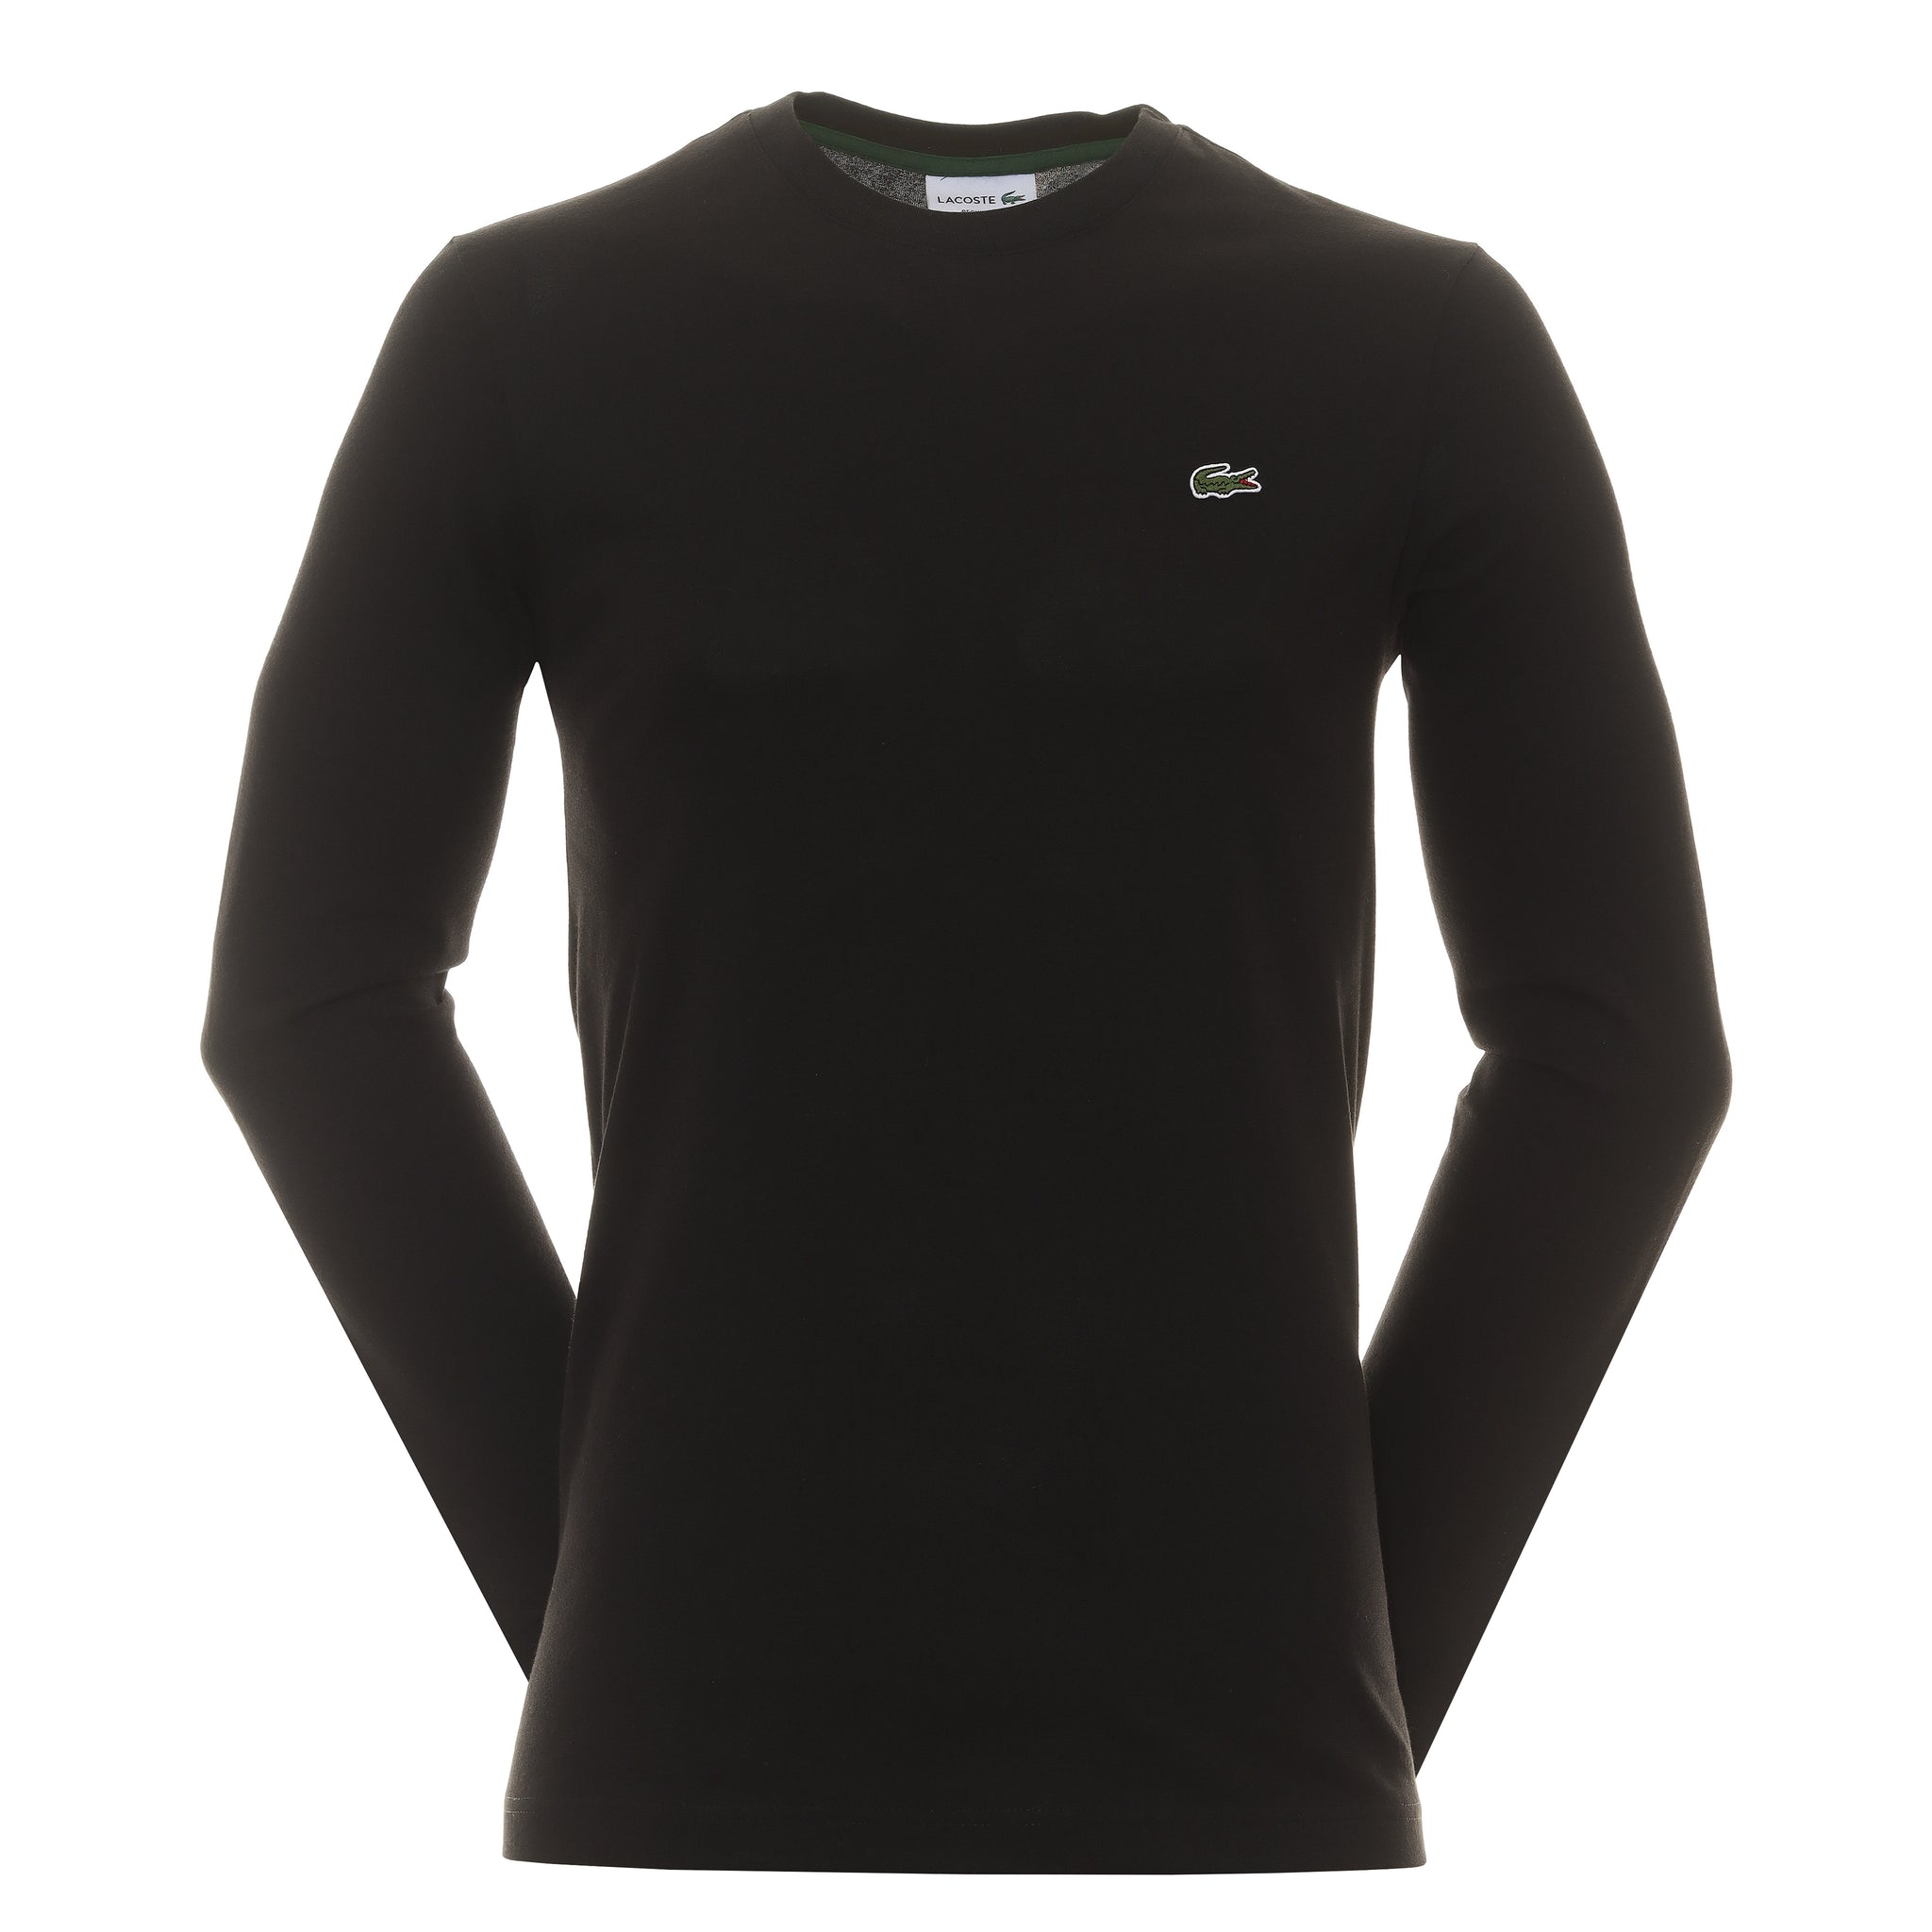 Lacoste Long Sleeve Tee Shirt TH3662 Black 031 | Function18